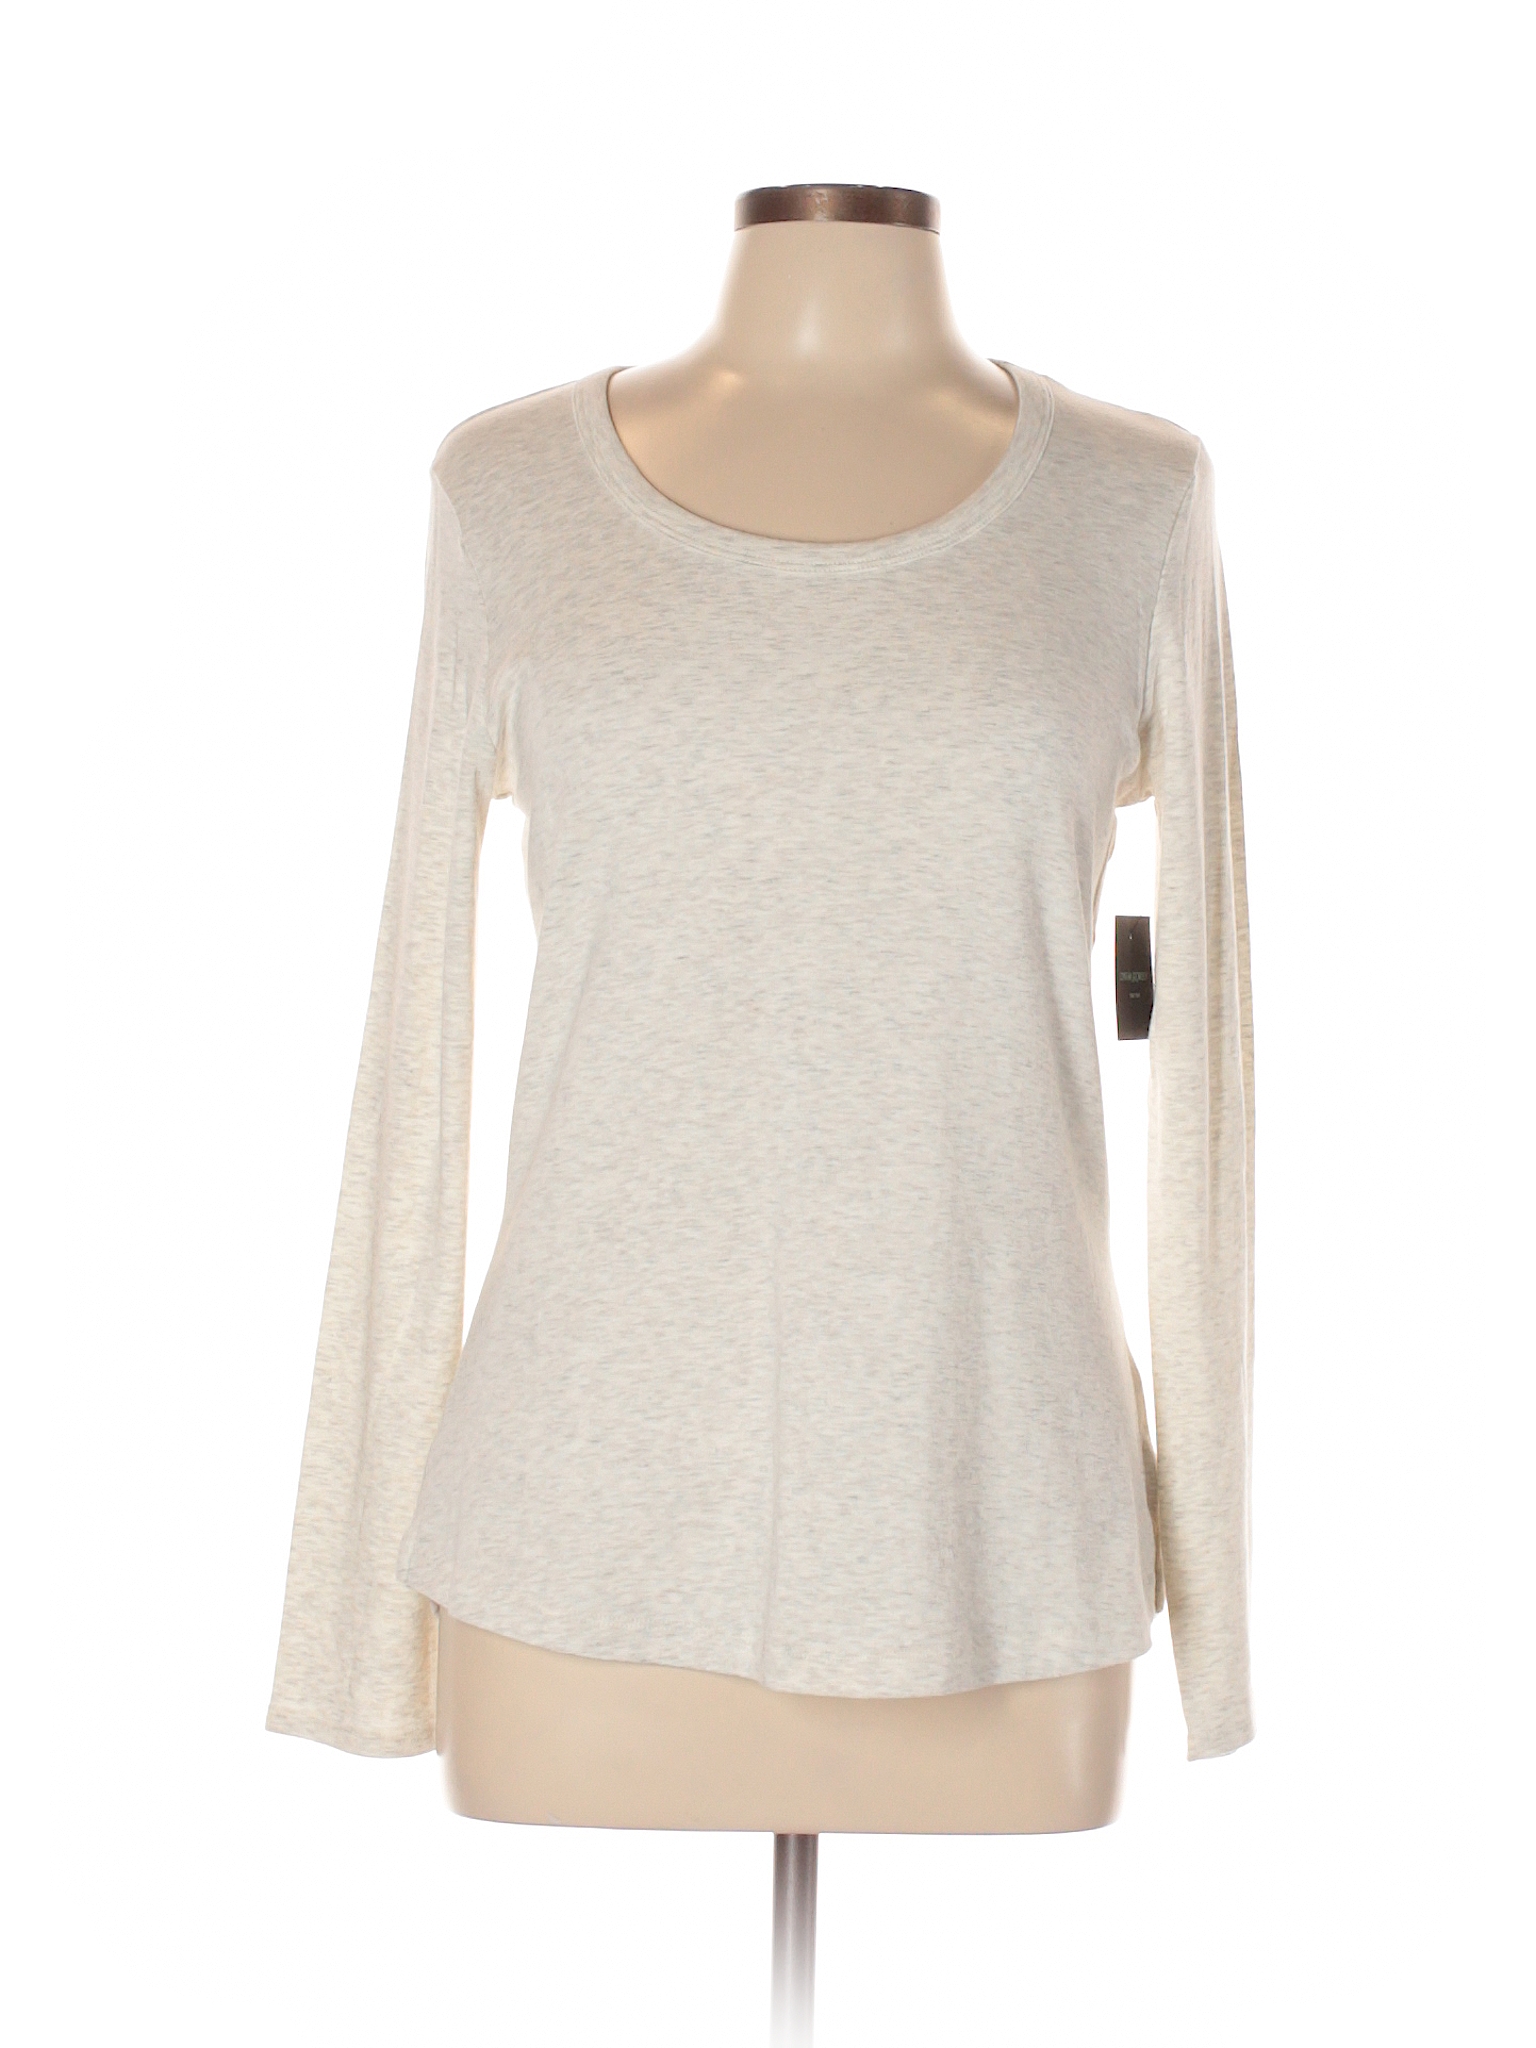 Cynthia Rowley TJX Solid Beige Long Sleeve T-Shirt Size L - 58% off ...